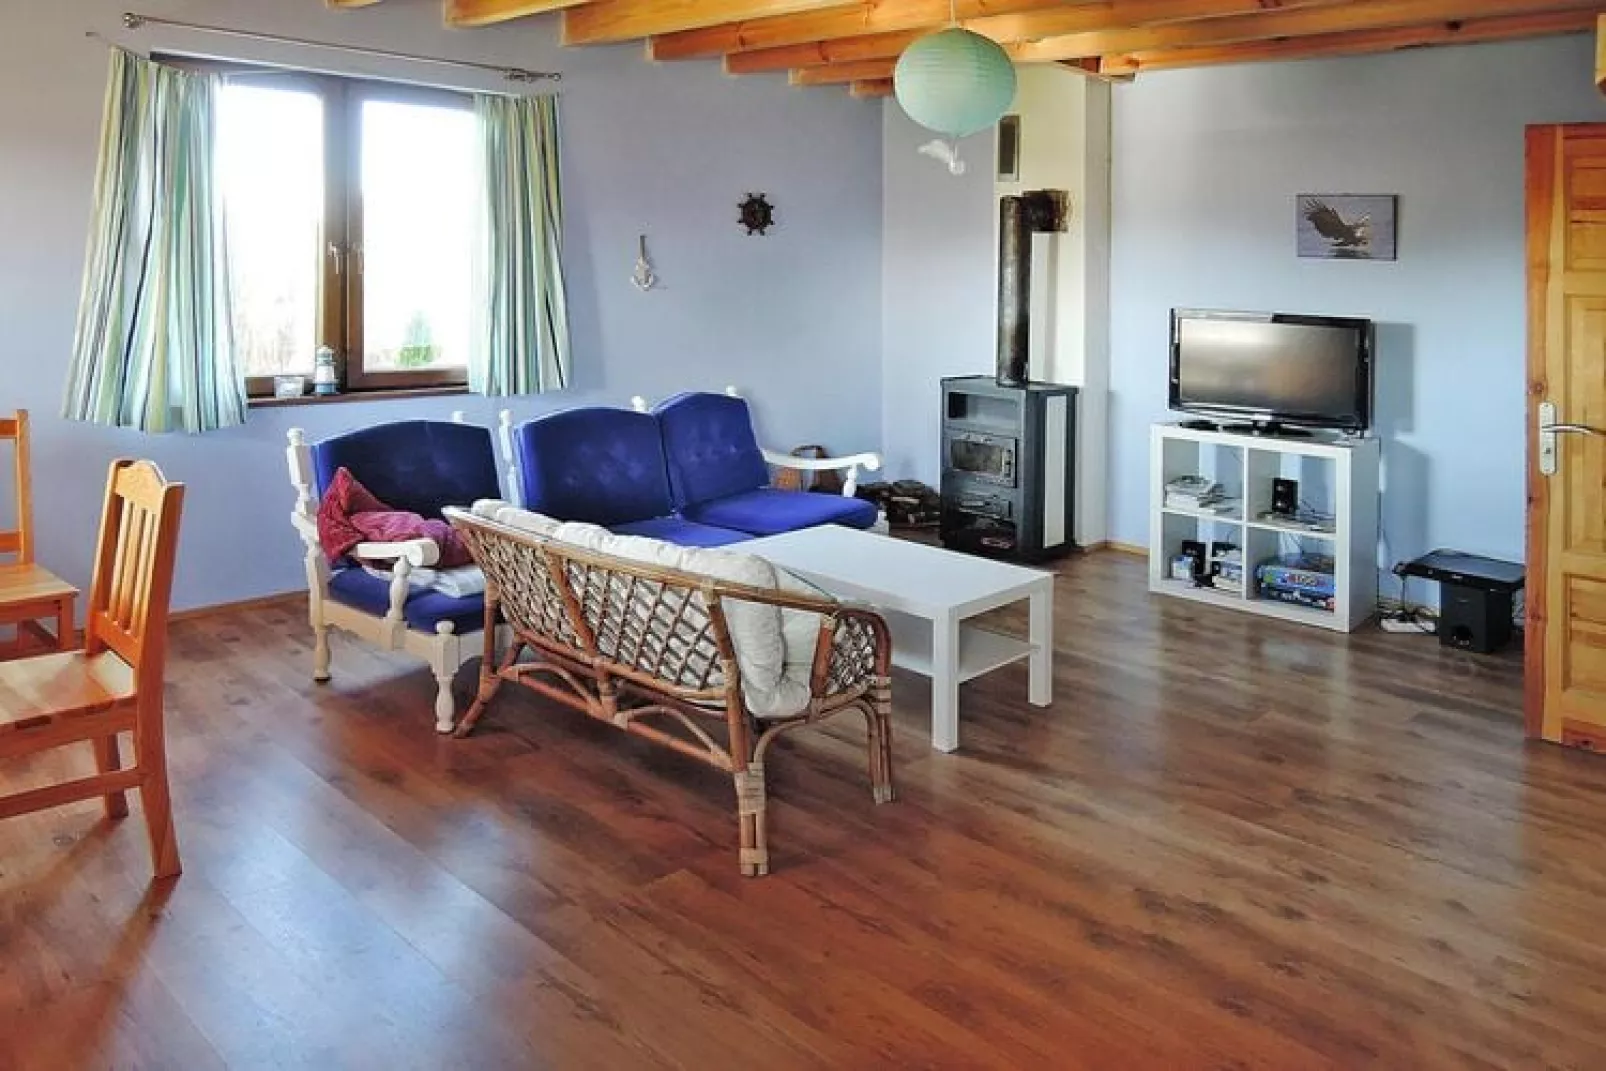 Holiday homes in Swinoujście for 7 persons - 90 qm